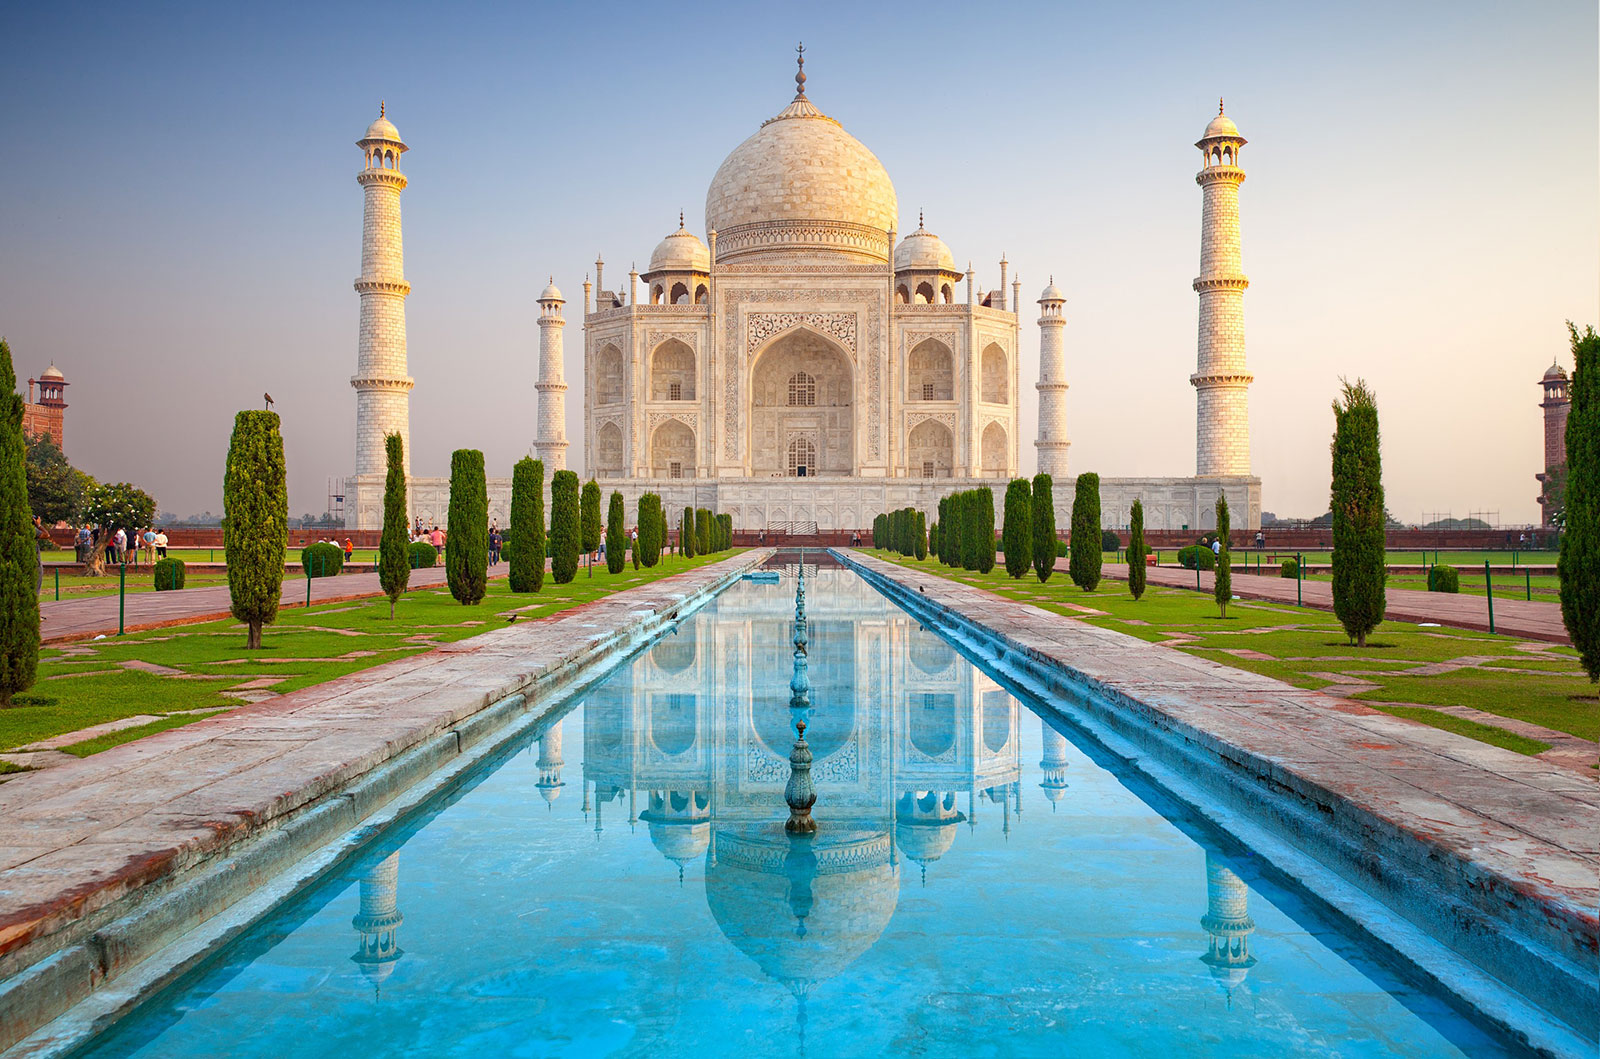 Anyone With the Most Basic Geographic Knowledge Should Get 19/26 on This Quiz Taj Mahal, India